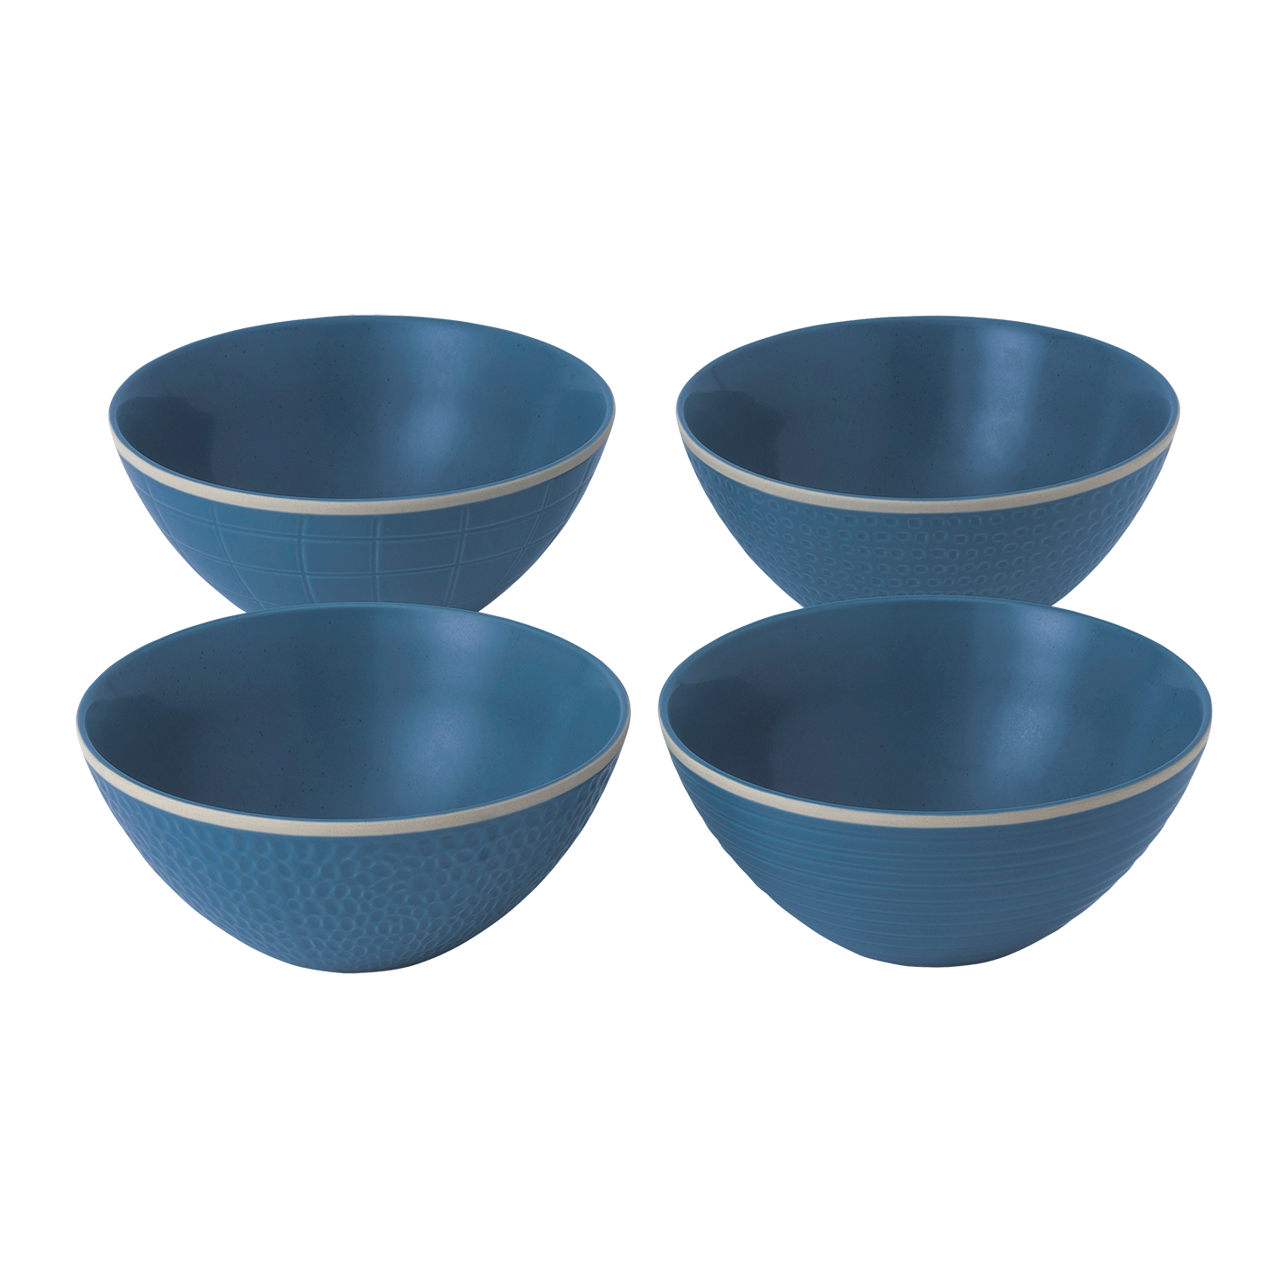 Maze Grill Mixed Blue Cereal Bowls